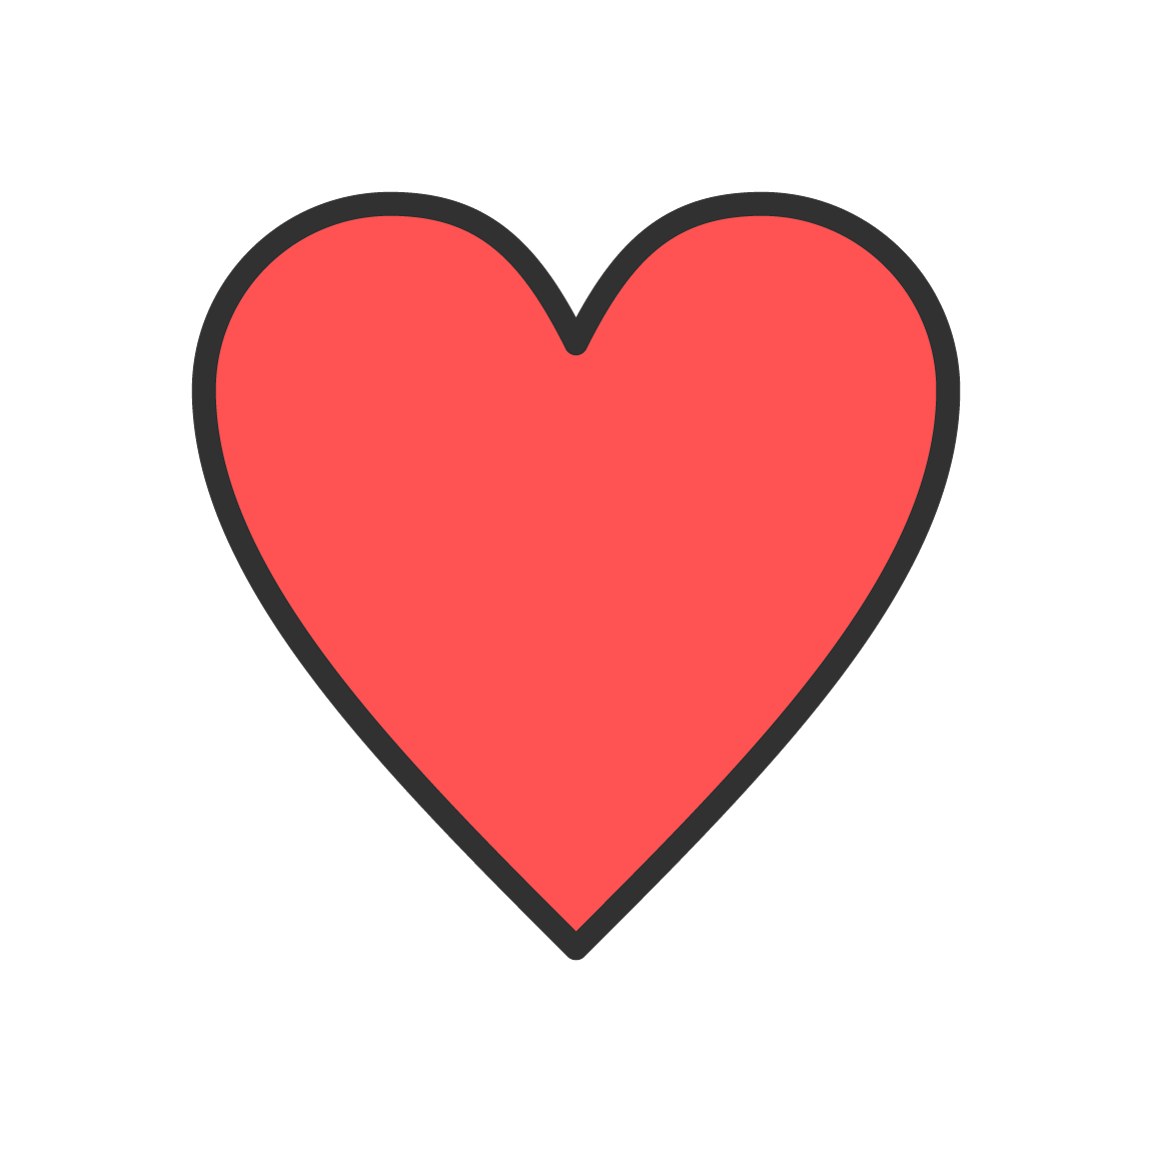 —Pngtree—vector heart icon_4224232